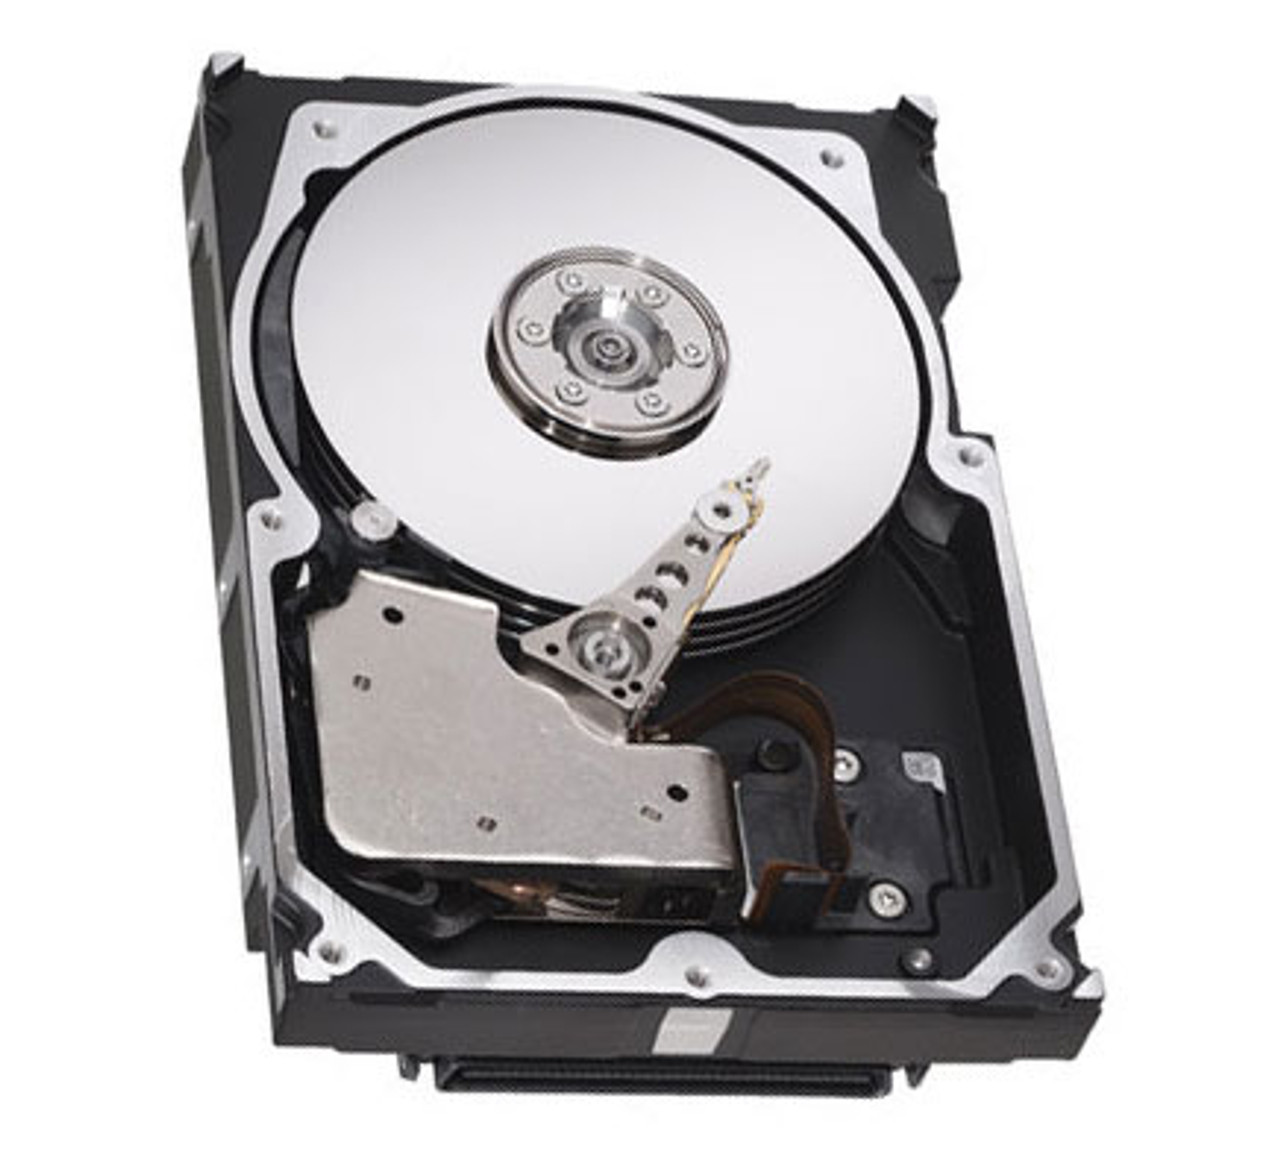 00H892 Dell 18GB 10000RPM Ultra-160 SCSI 80-Pin 3.5-inch Internal Hard Drive for PowerEdge 4400